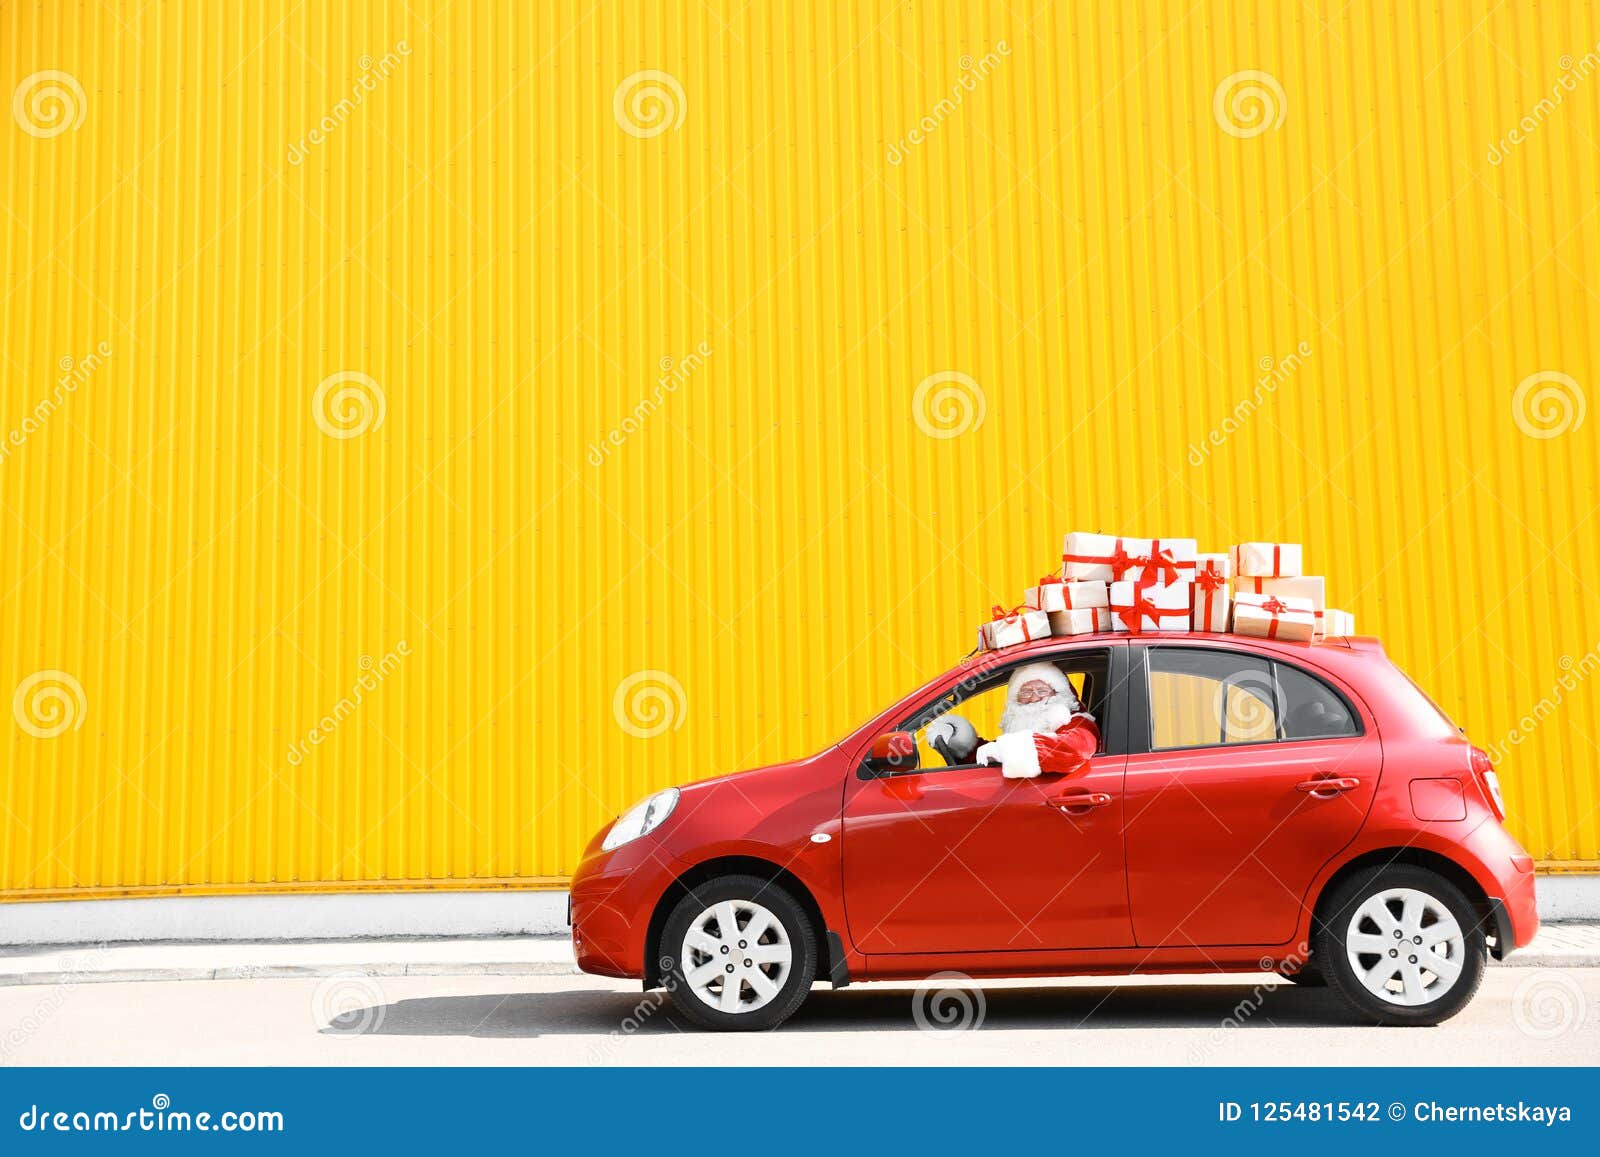 authentic santa claus driving red car with gift boxes